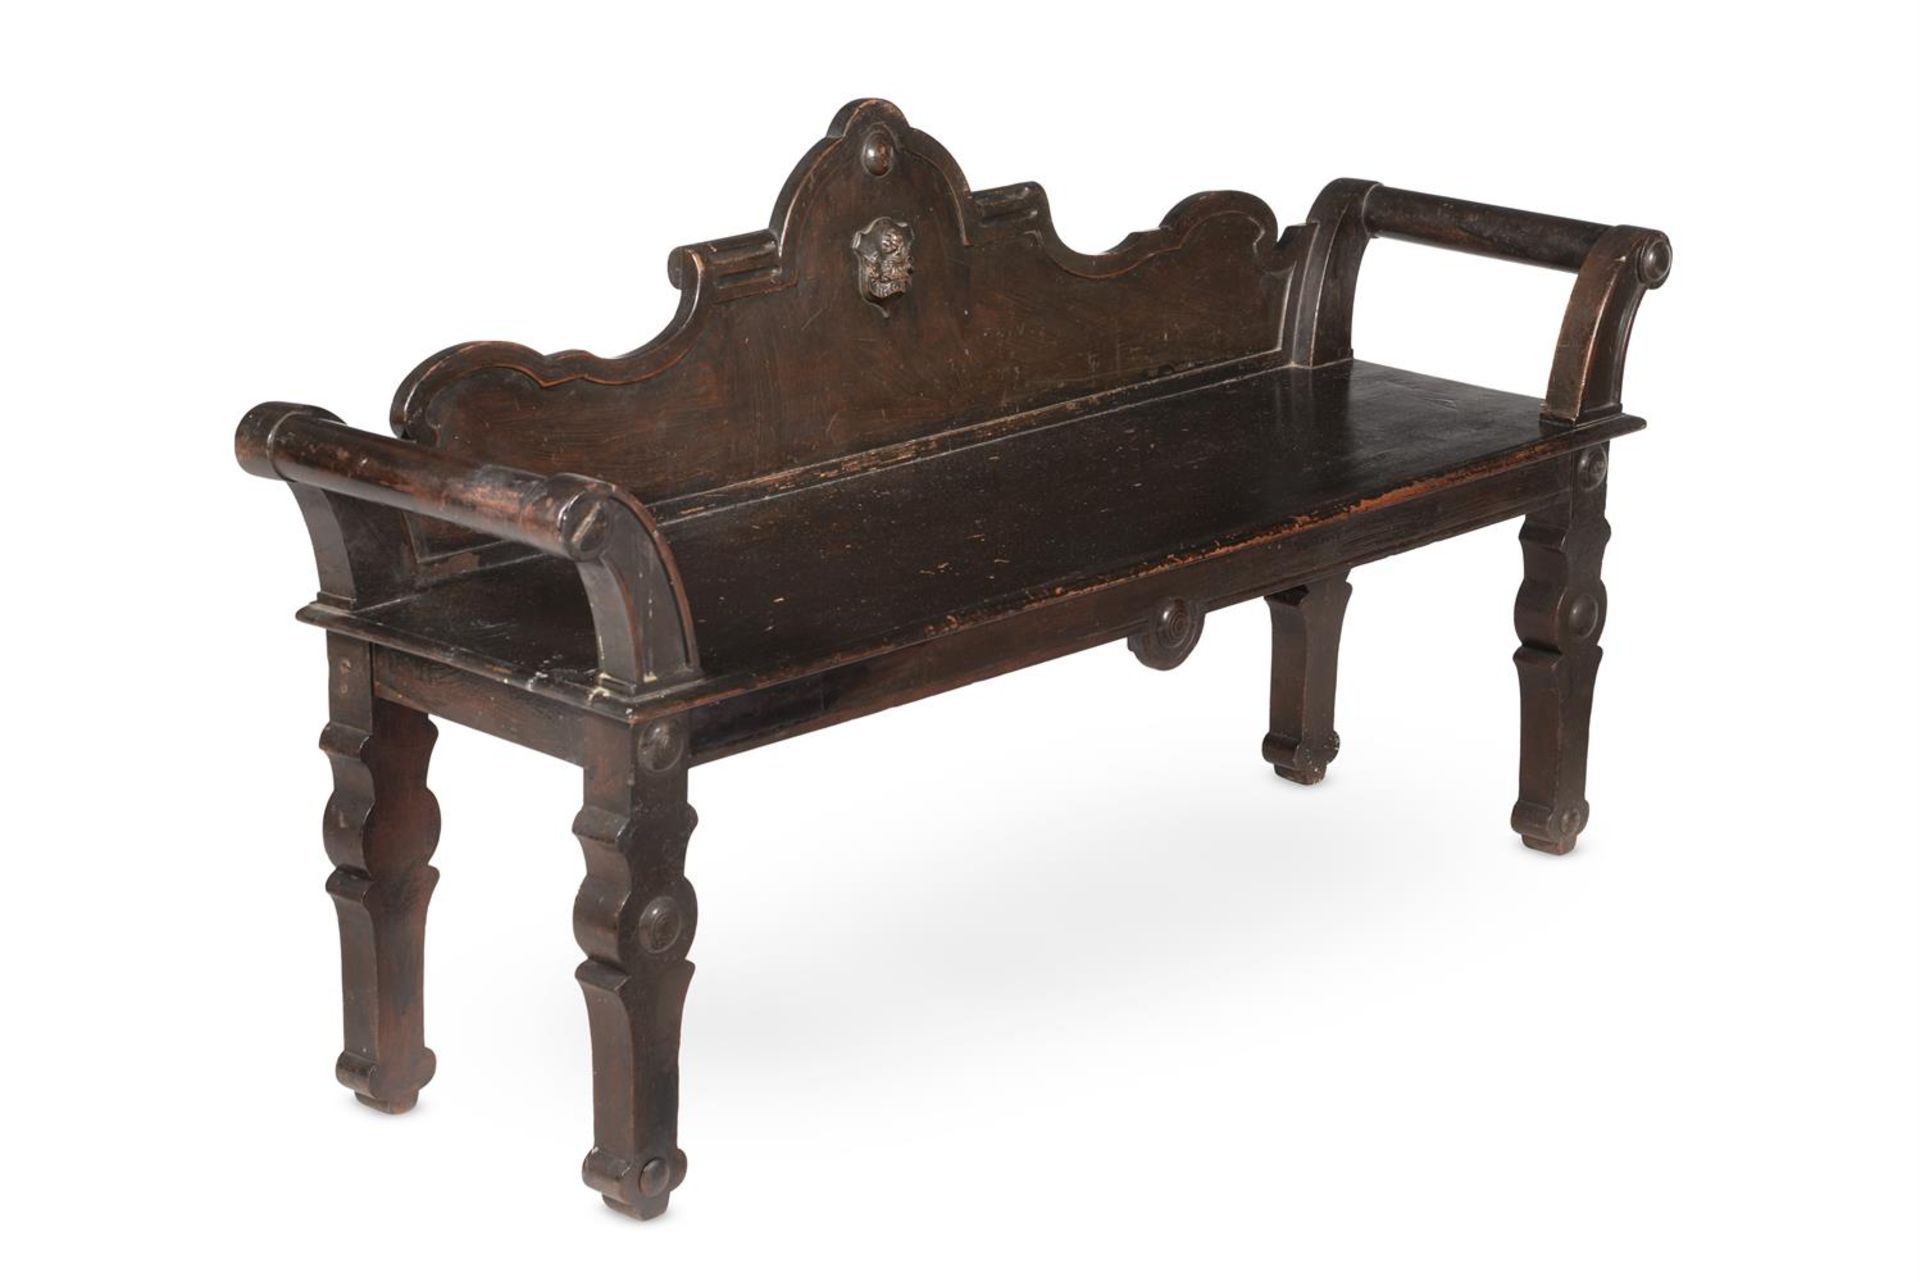 AN EARLY VICTORIAN PAINTED HALL BENCH, IN THE MANNER OF RICHARD BRIDGENS, MID 19TH CENTURY - Image 2 of 3